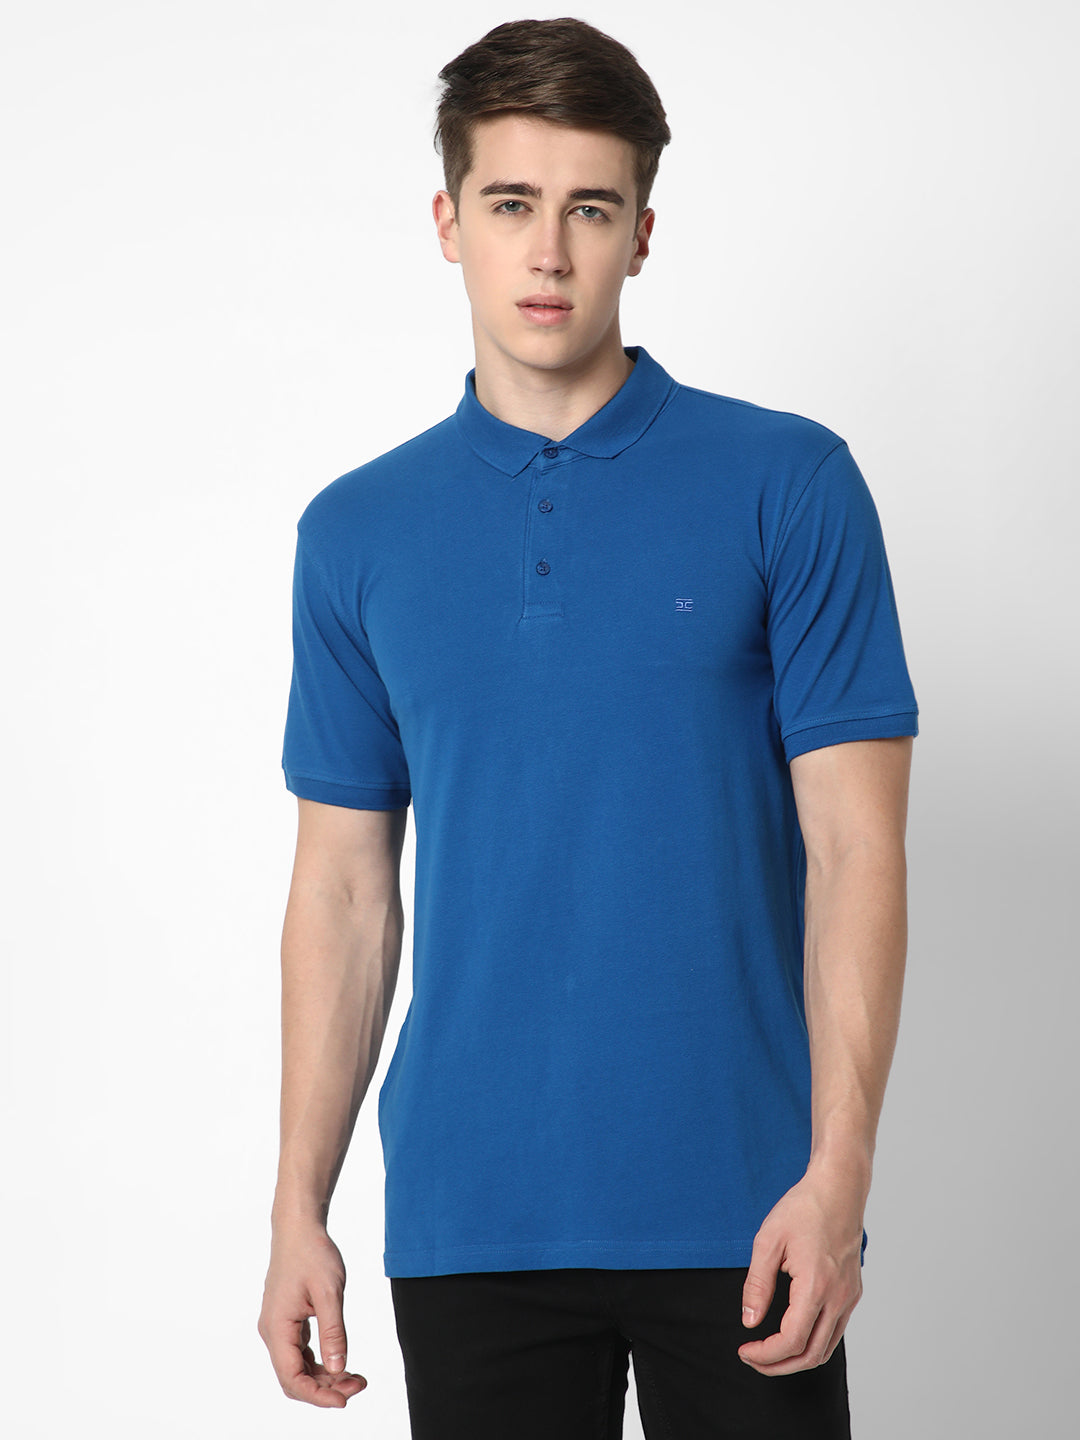 Cotstyle Cotton Fabrics Polo Short Length Plain Half Sleeve Casual & Daily Wear Men's T Shirts - Pack of 1 - Blue Glow Colour